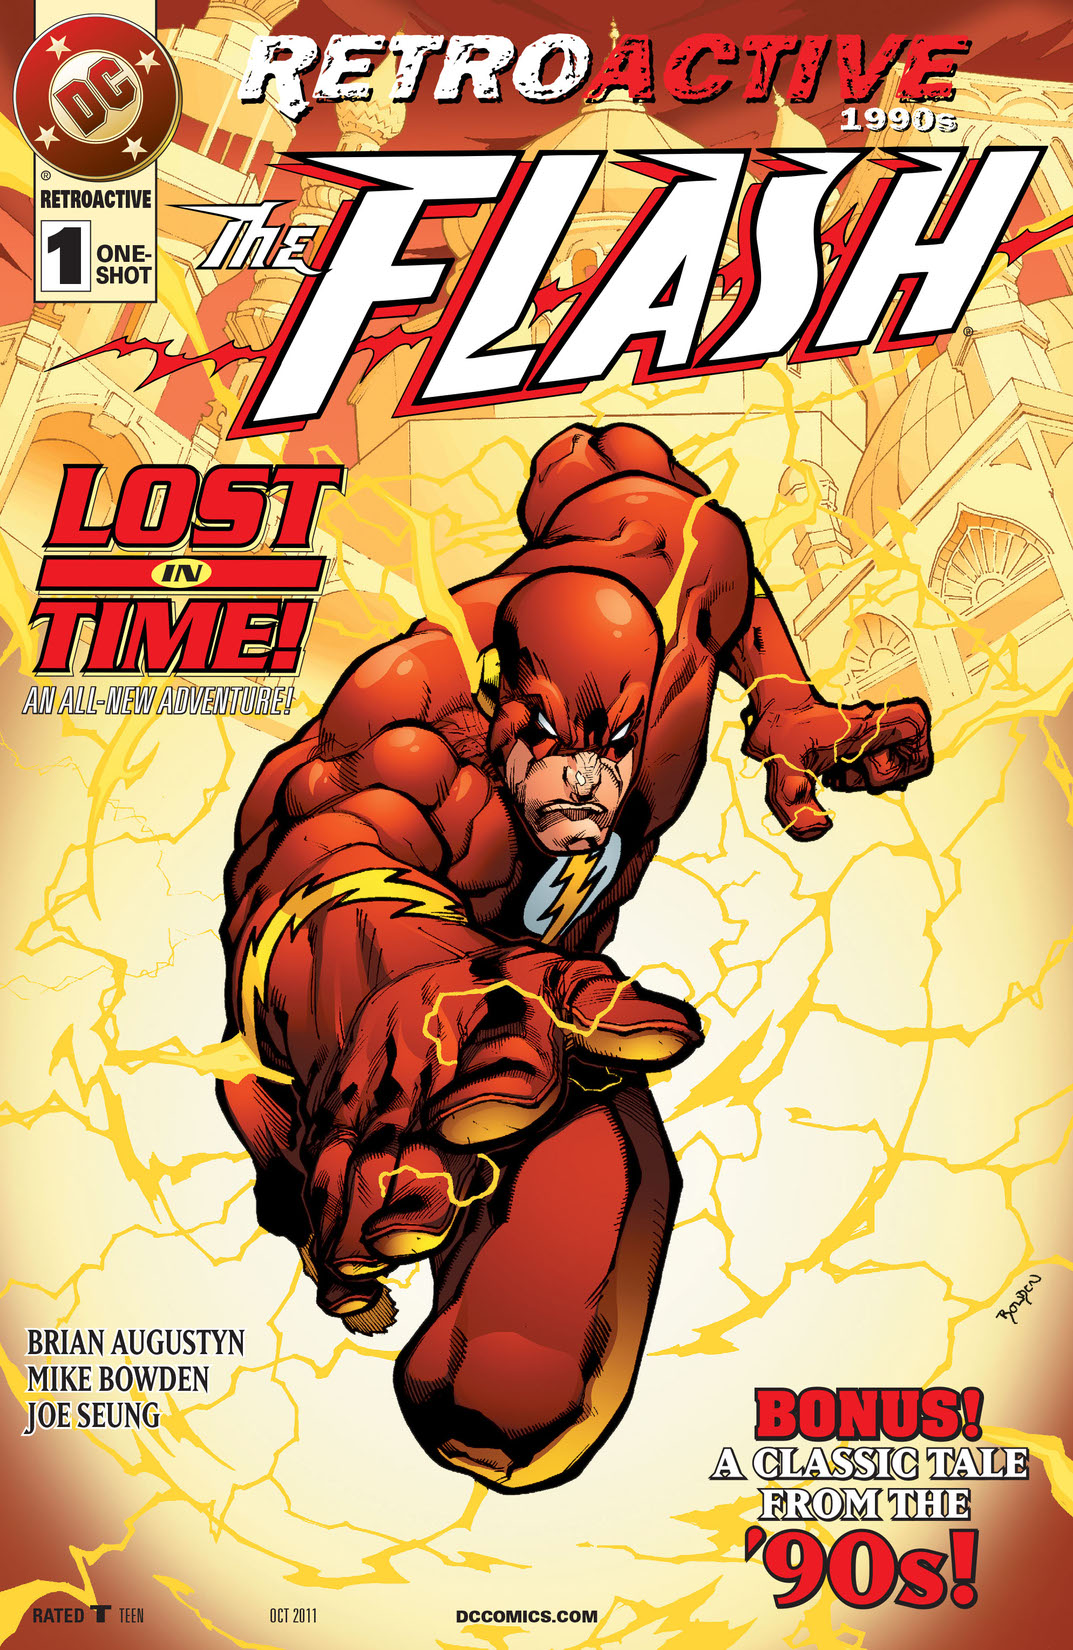 DC Retroactive: Flash - The '90s #1 preview images